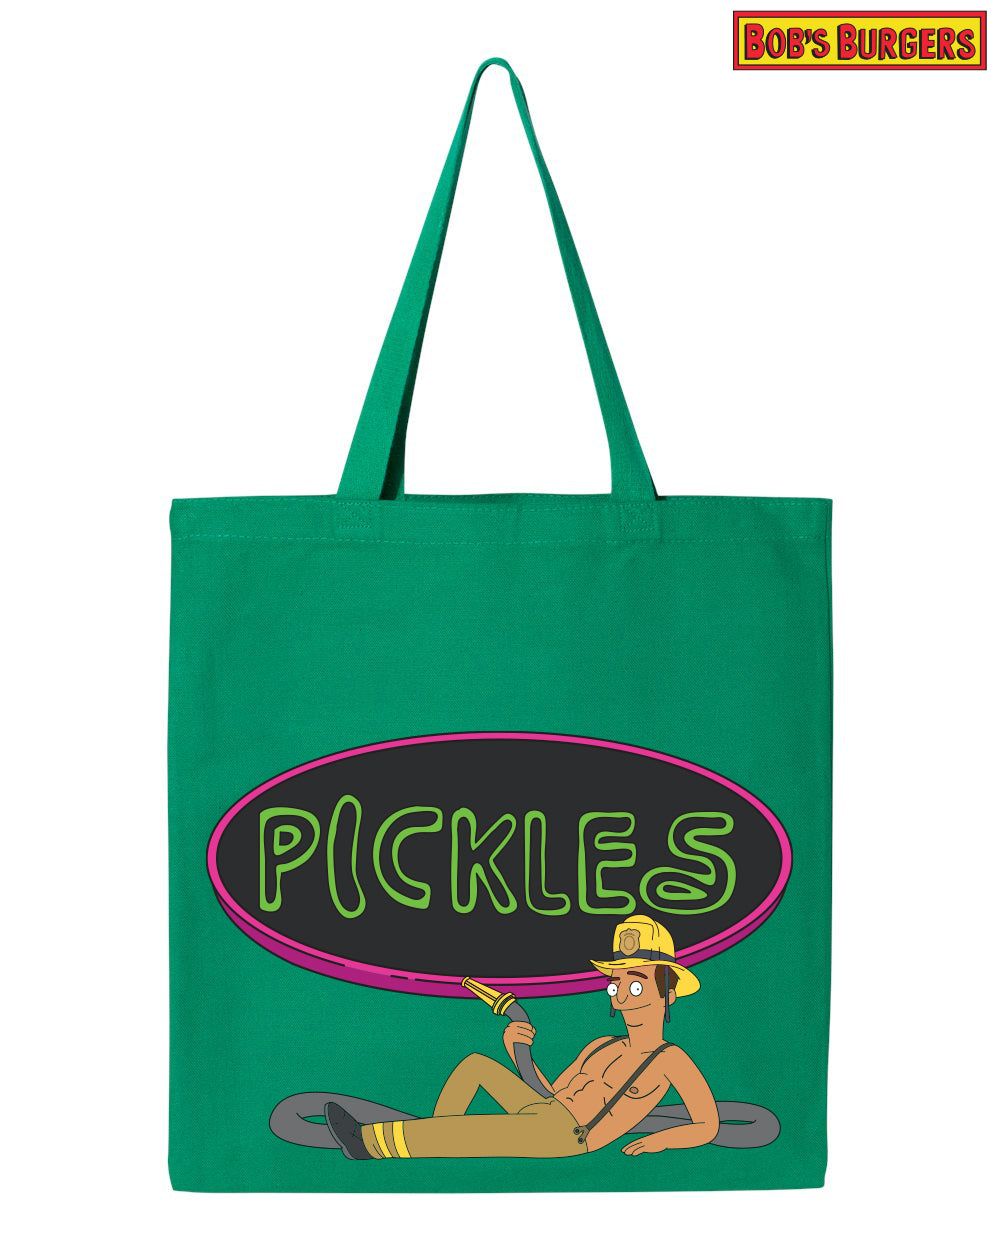 2021 Bob's Burgers Pickles heavy canvas grocery tote (pre-order, ships 8/15-8/30)